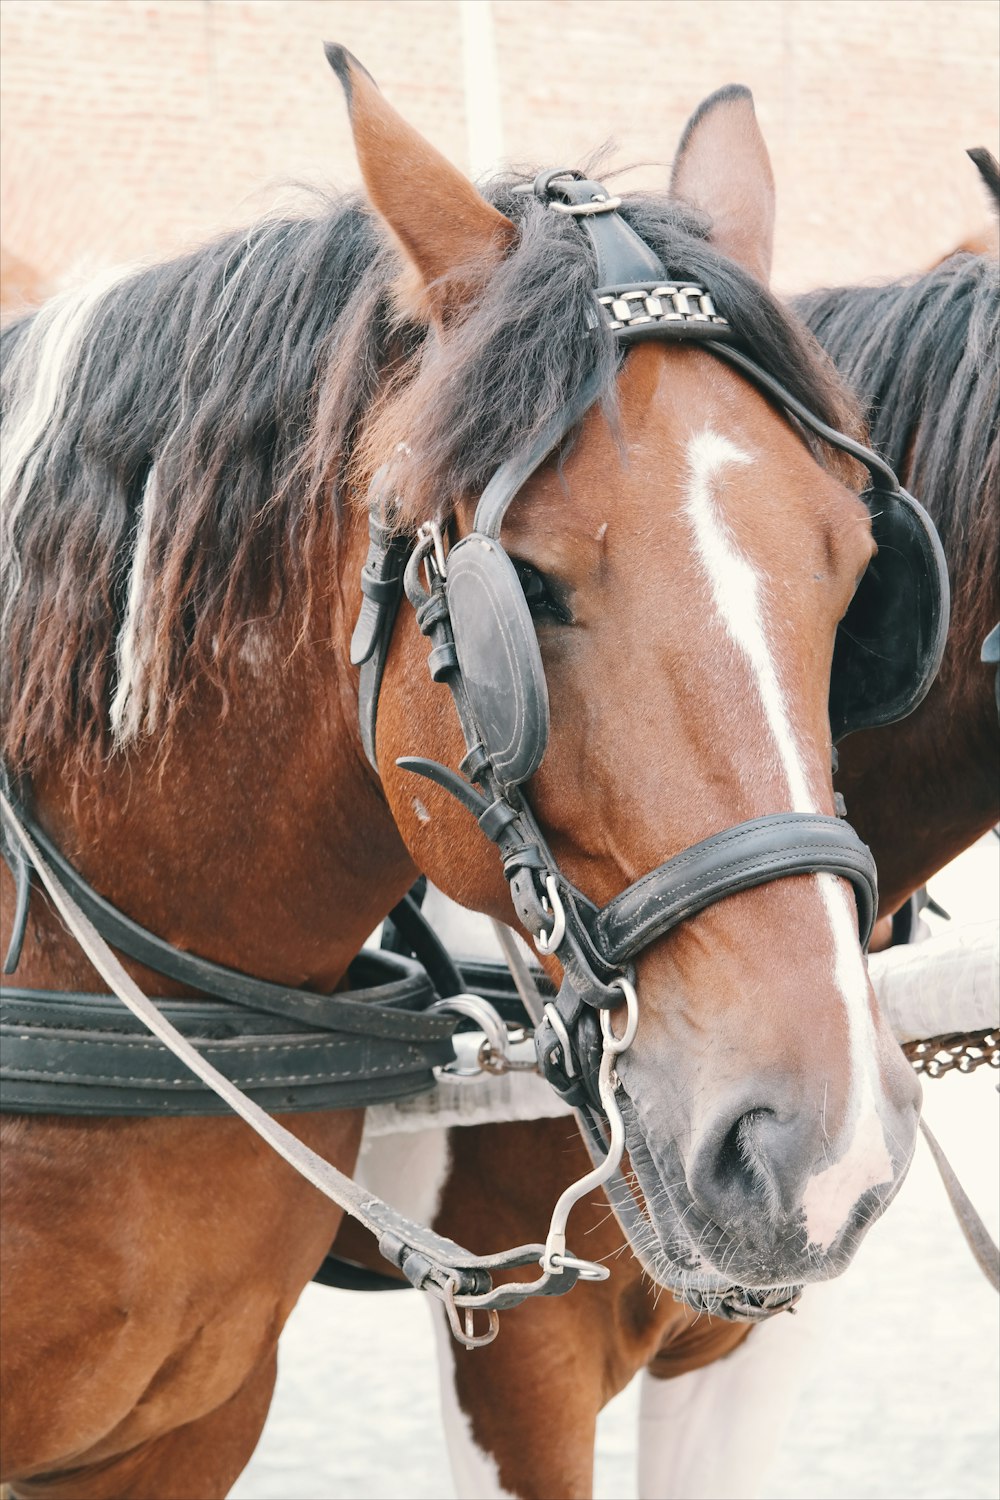 A saddled horse's face viewed from the front.